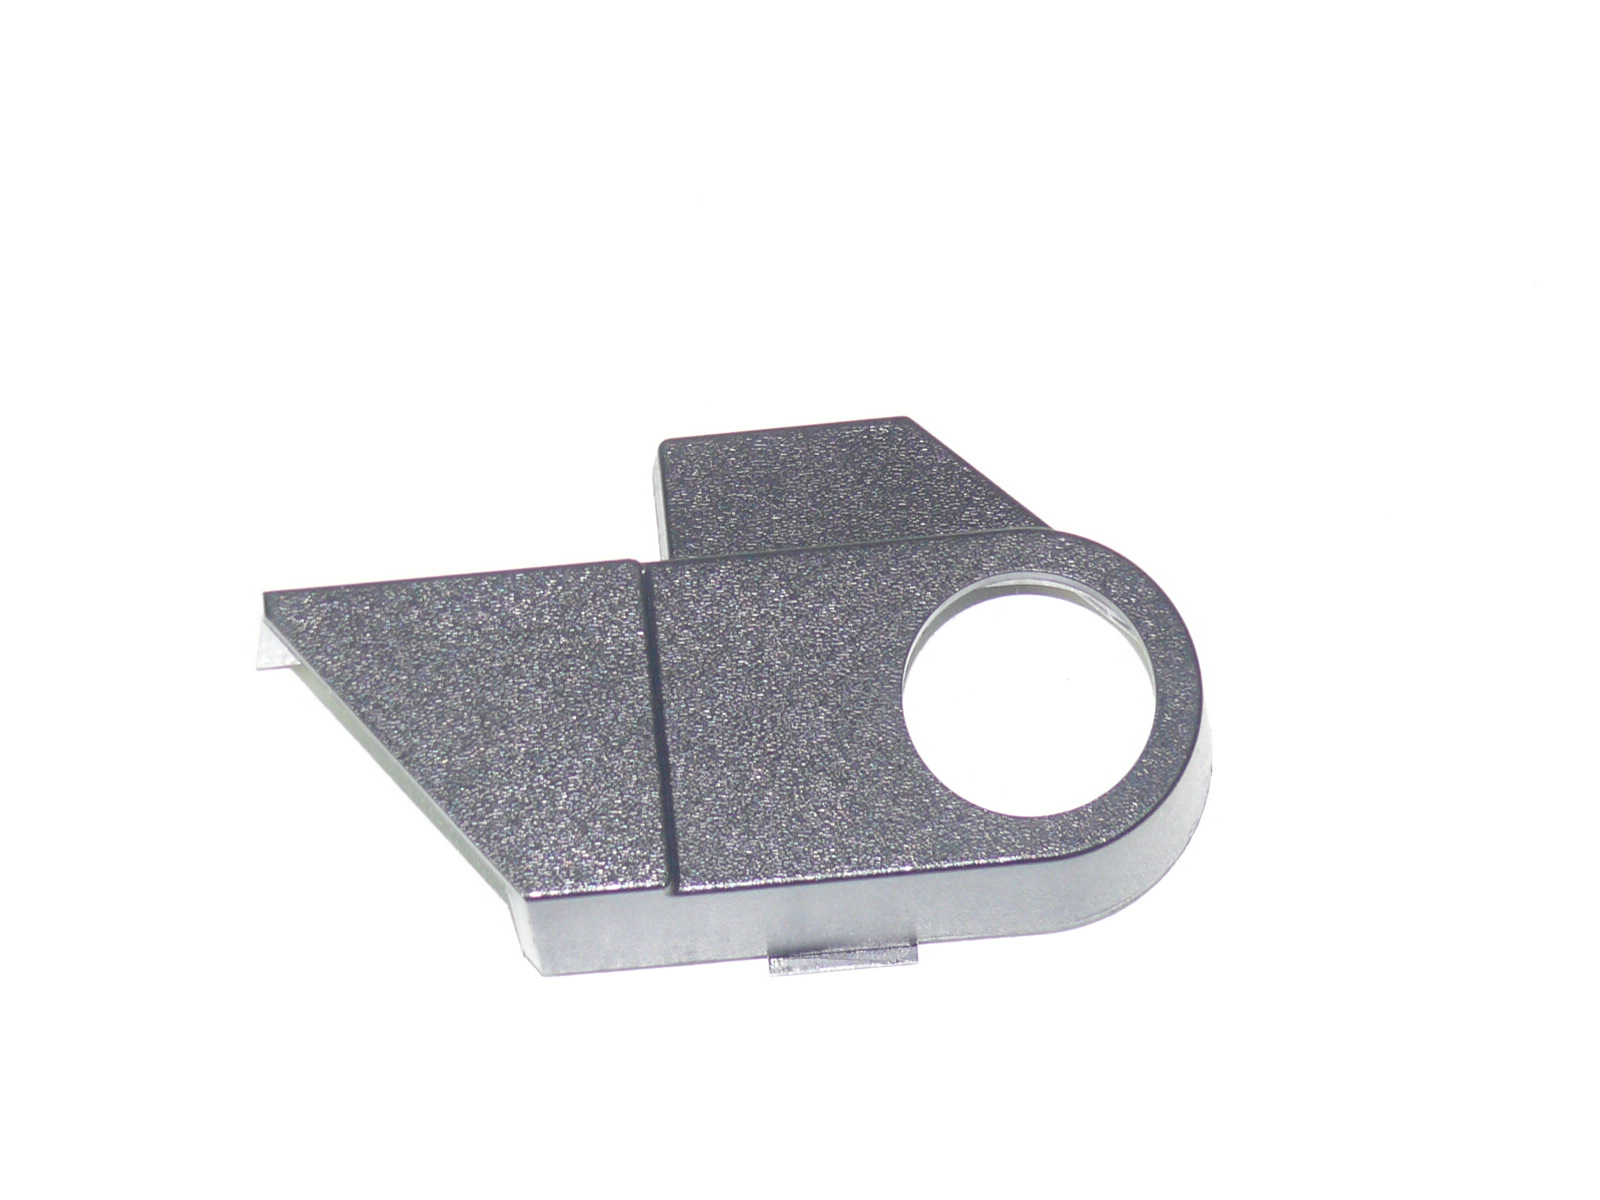 54P1379 -  - 6400 Platen/Paper Feed Cover Kit